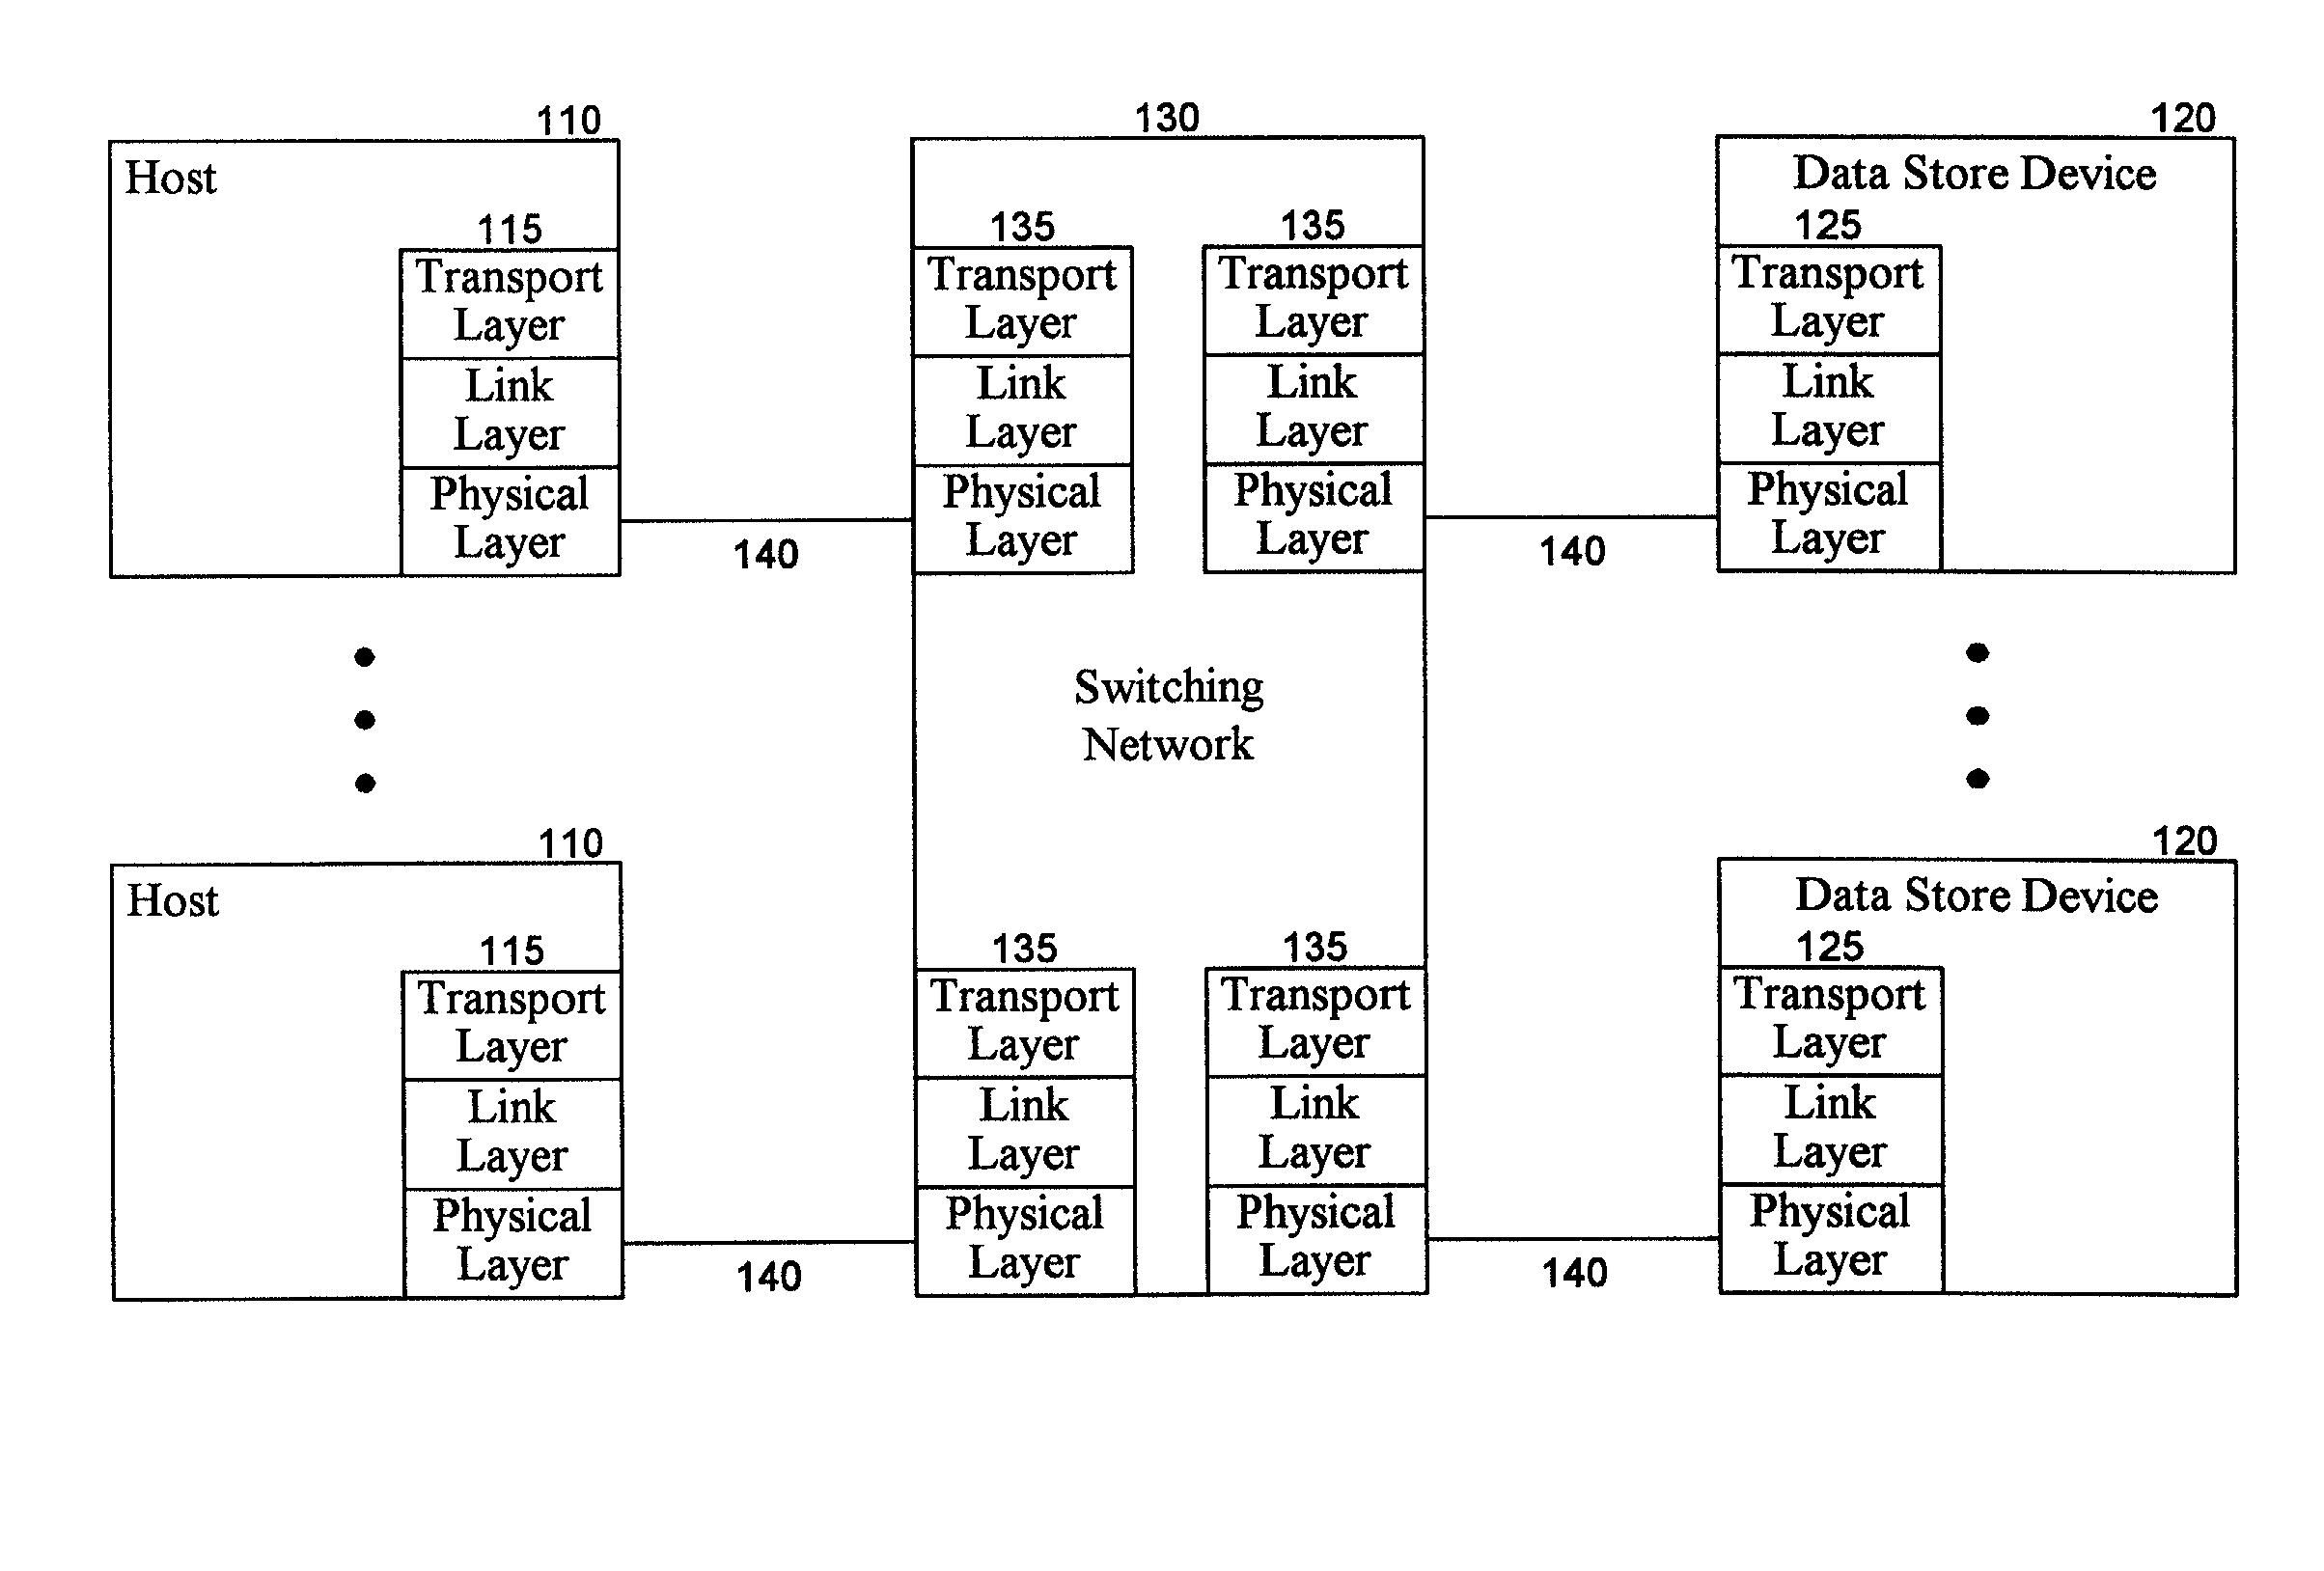 Multisection memory bank system